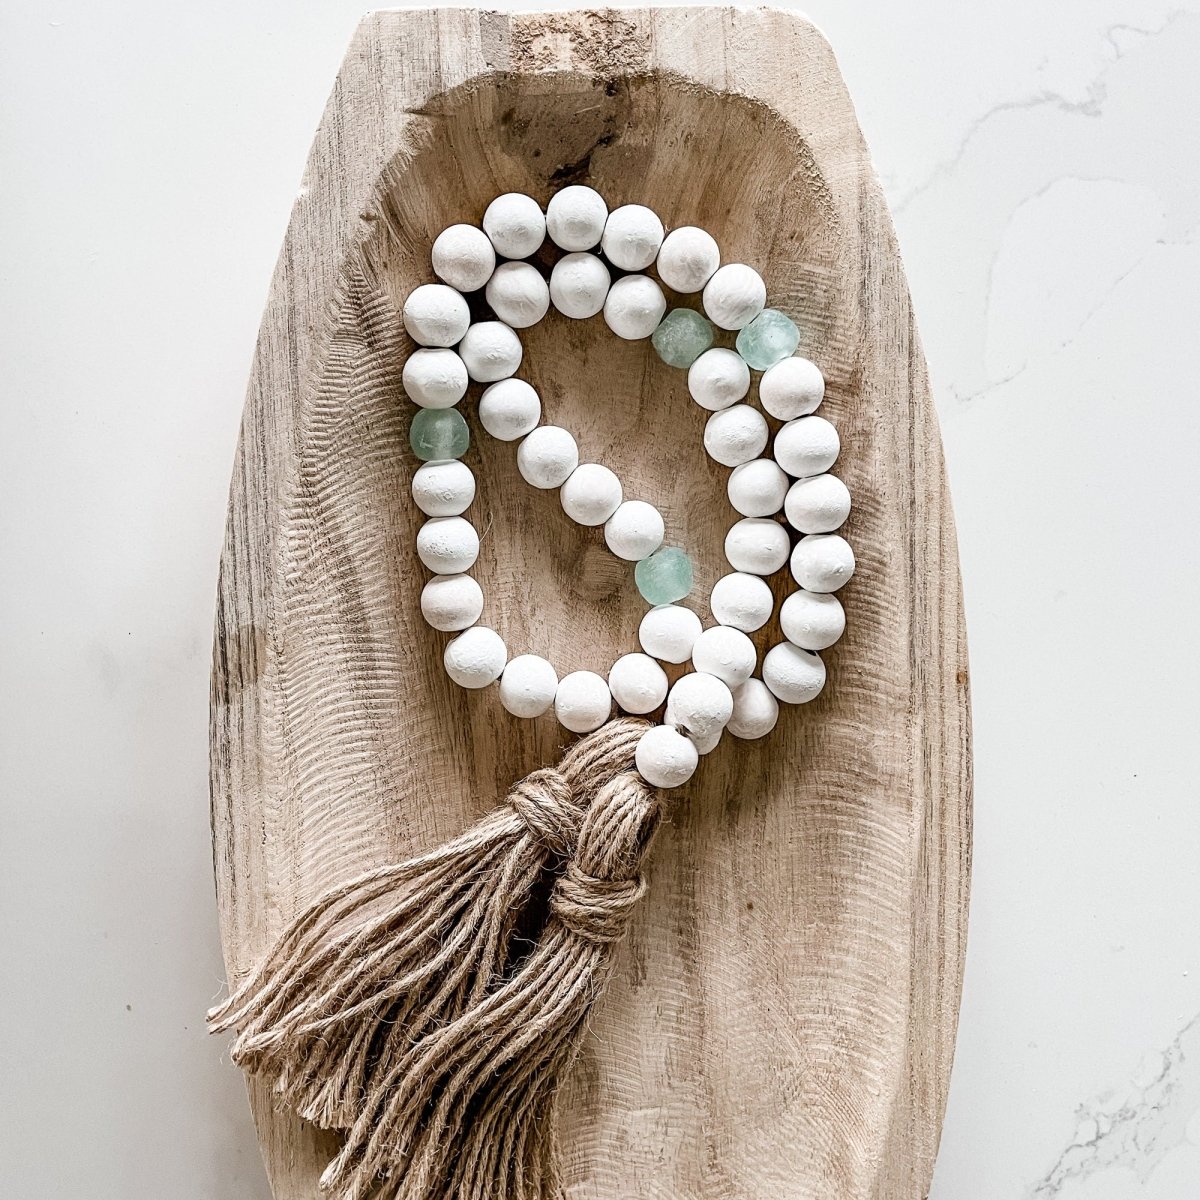 Load image into Gallery viewer, Whitewashed Wood Bead Garland with Jumbo Aqua Recycled Glass Beads - sonder and wolf
